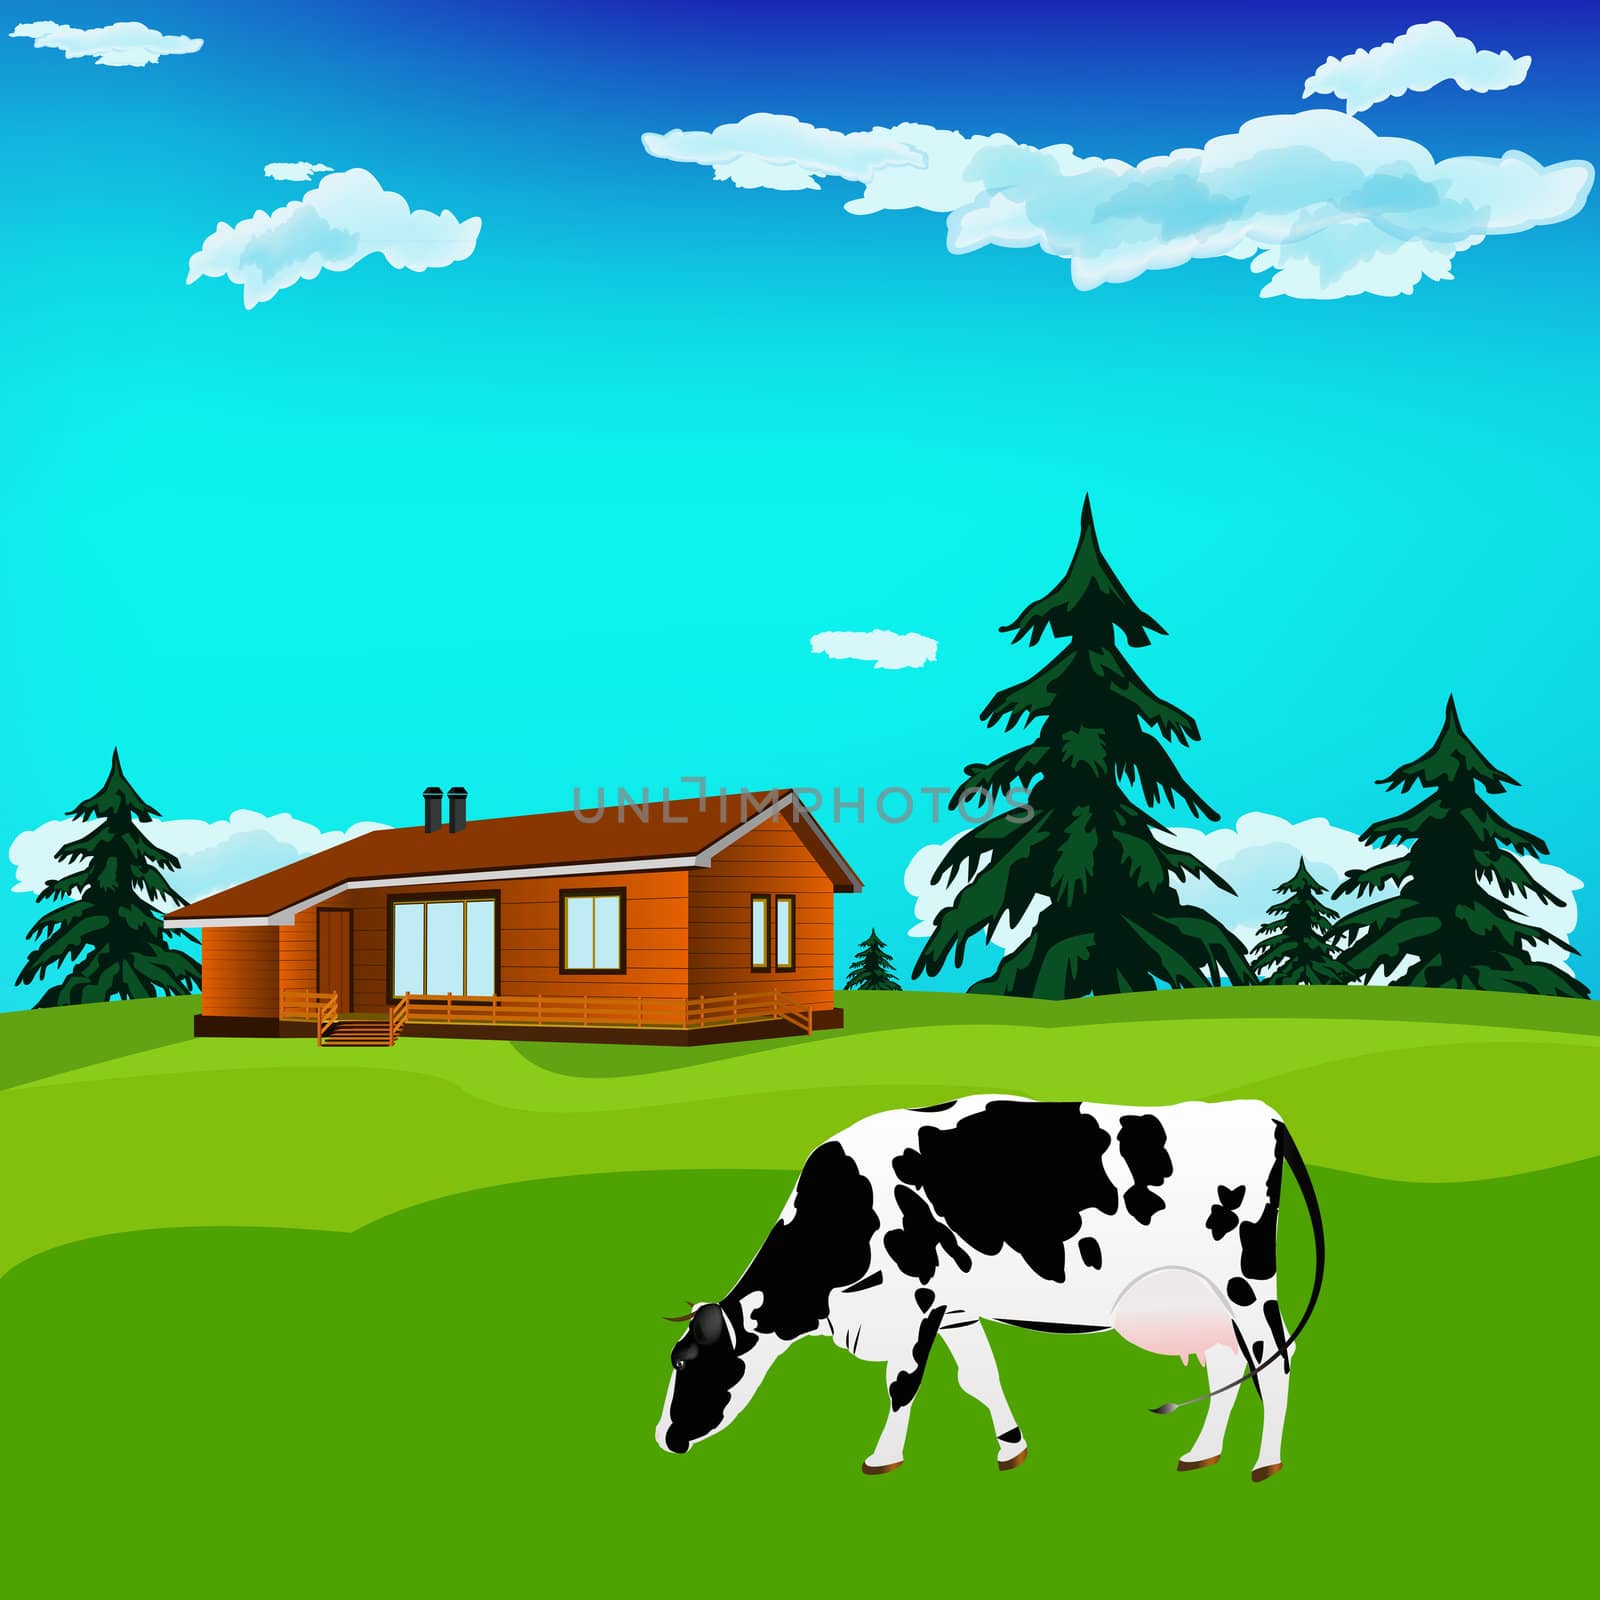 Dairy cow on a alps  green meadow. Alps landscape